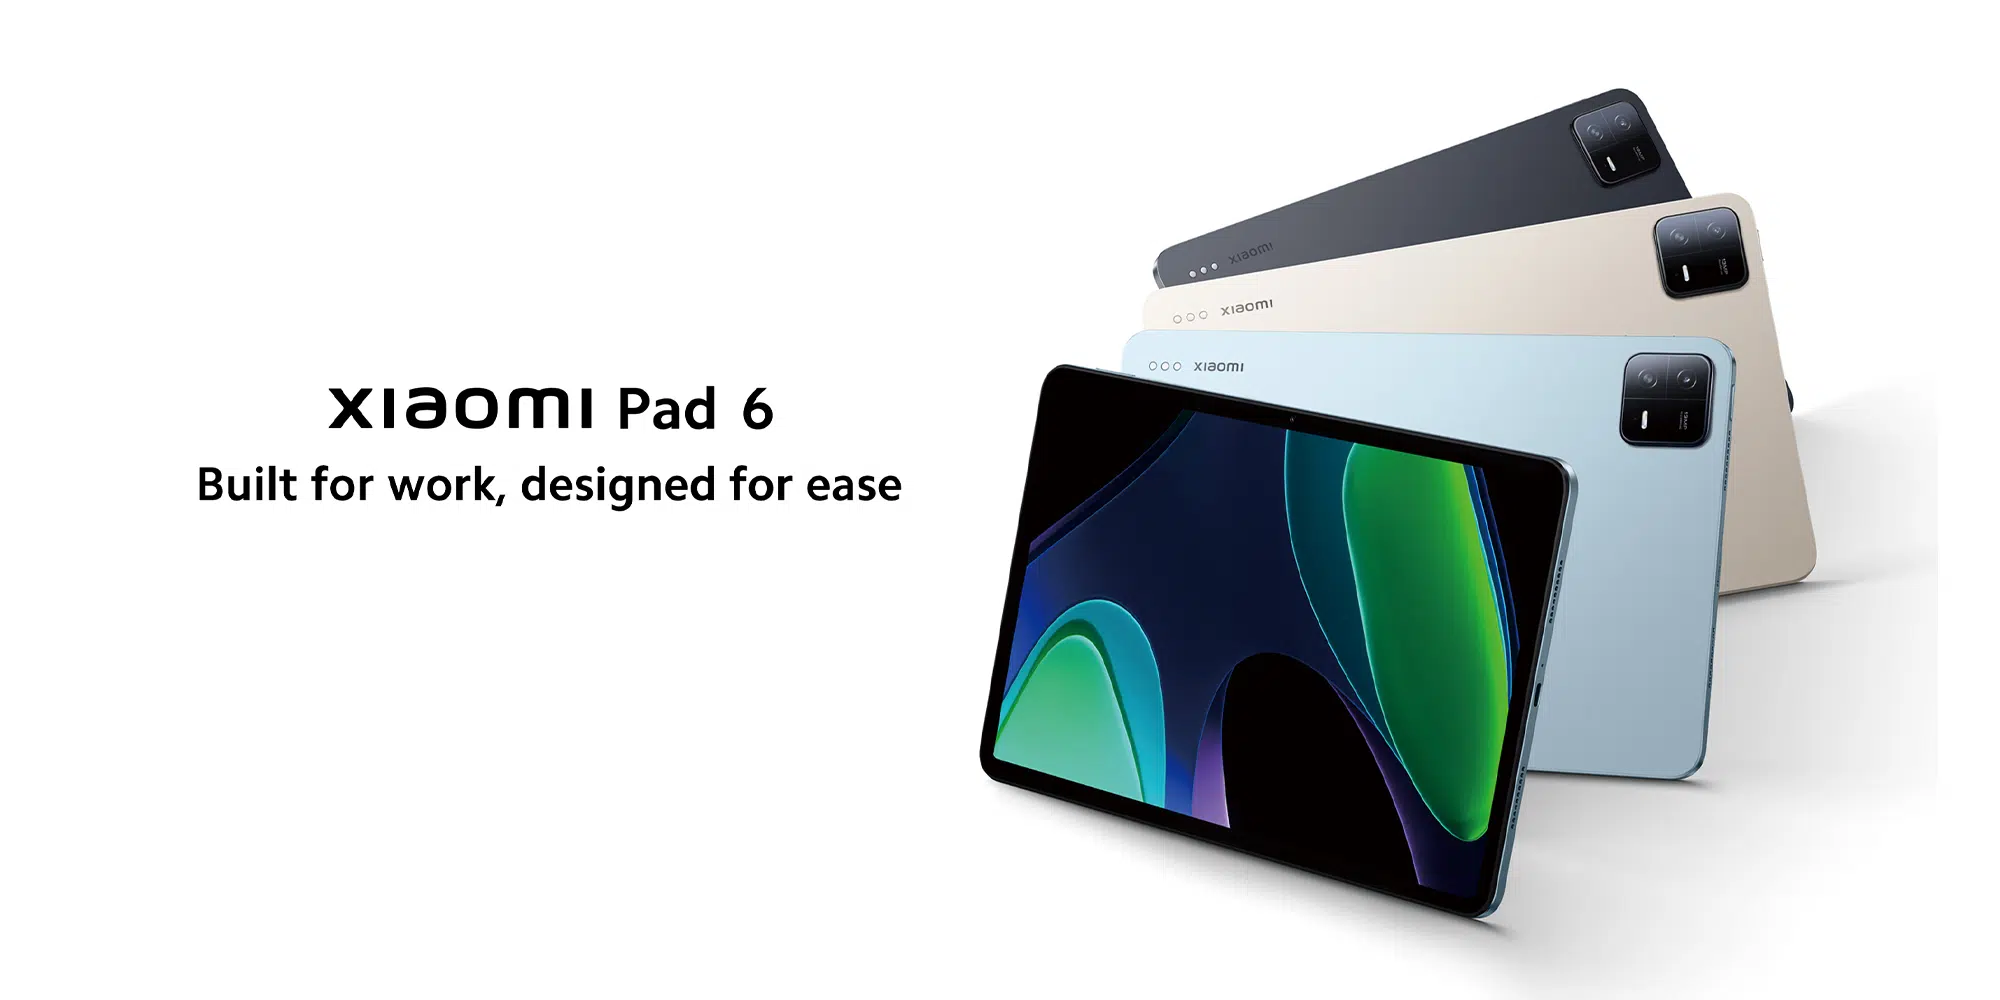 Xiaomi Pad 6, 8GB+128GB, Snapdragon® 870, 144Hz WQHD+ eye care display, Up  to 16 hours of video playback*